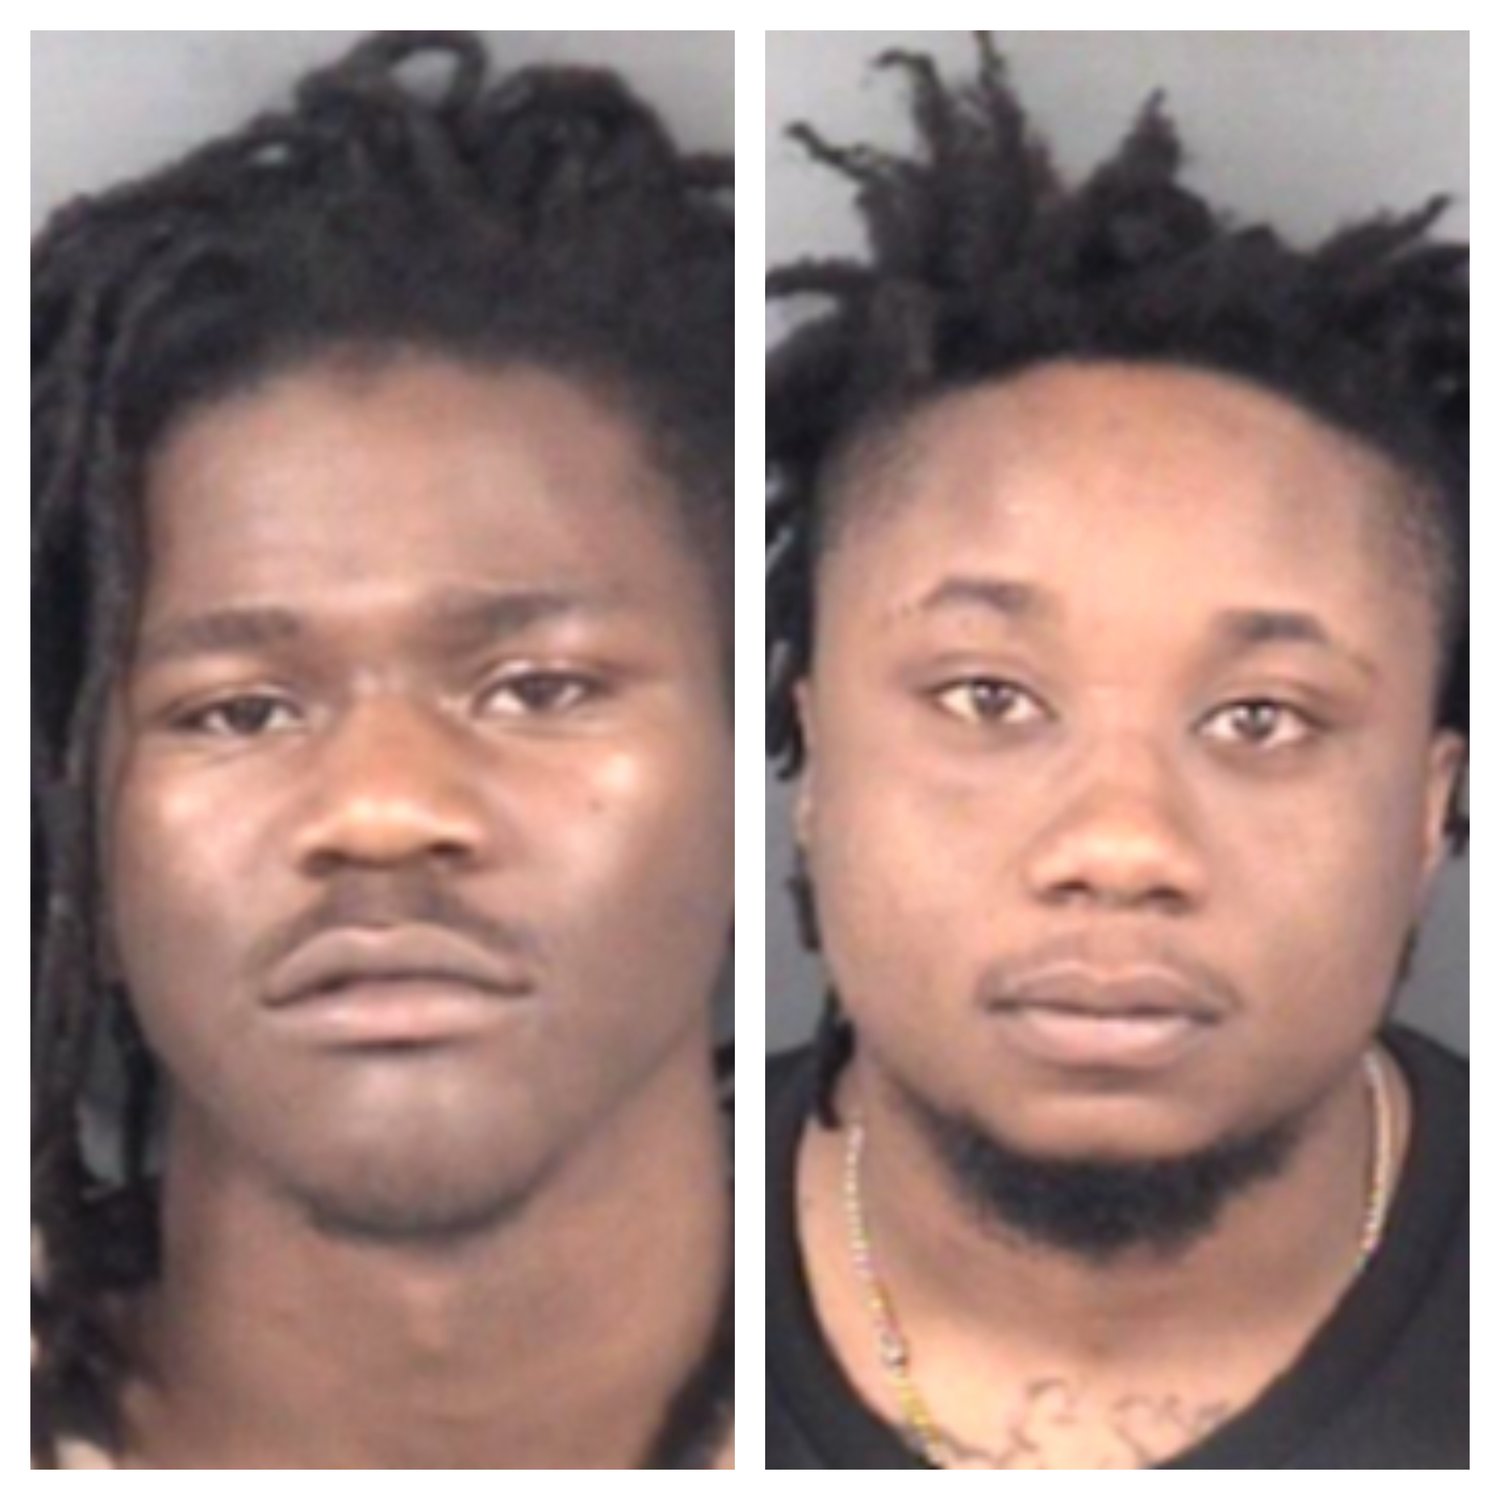 Jahrehl Malloy, left, and Nyhgil Kirk are charged with attempted murder in the shooting of a man outside Cross Creek Mall on Thursday.